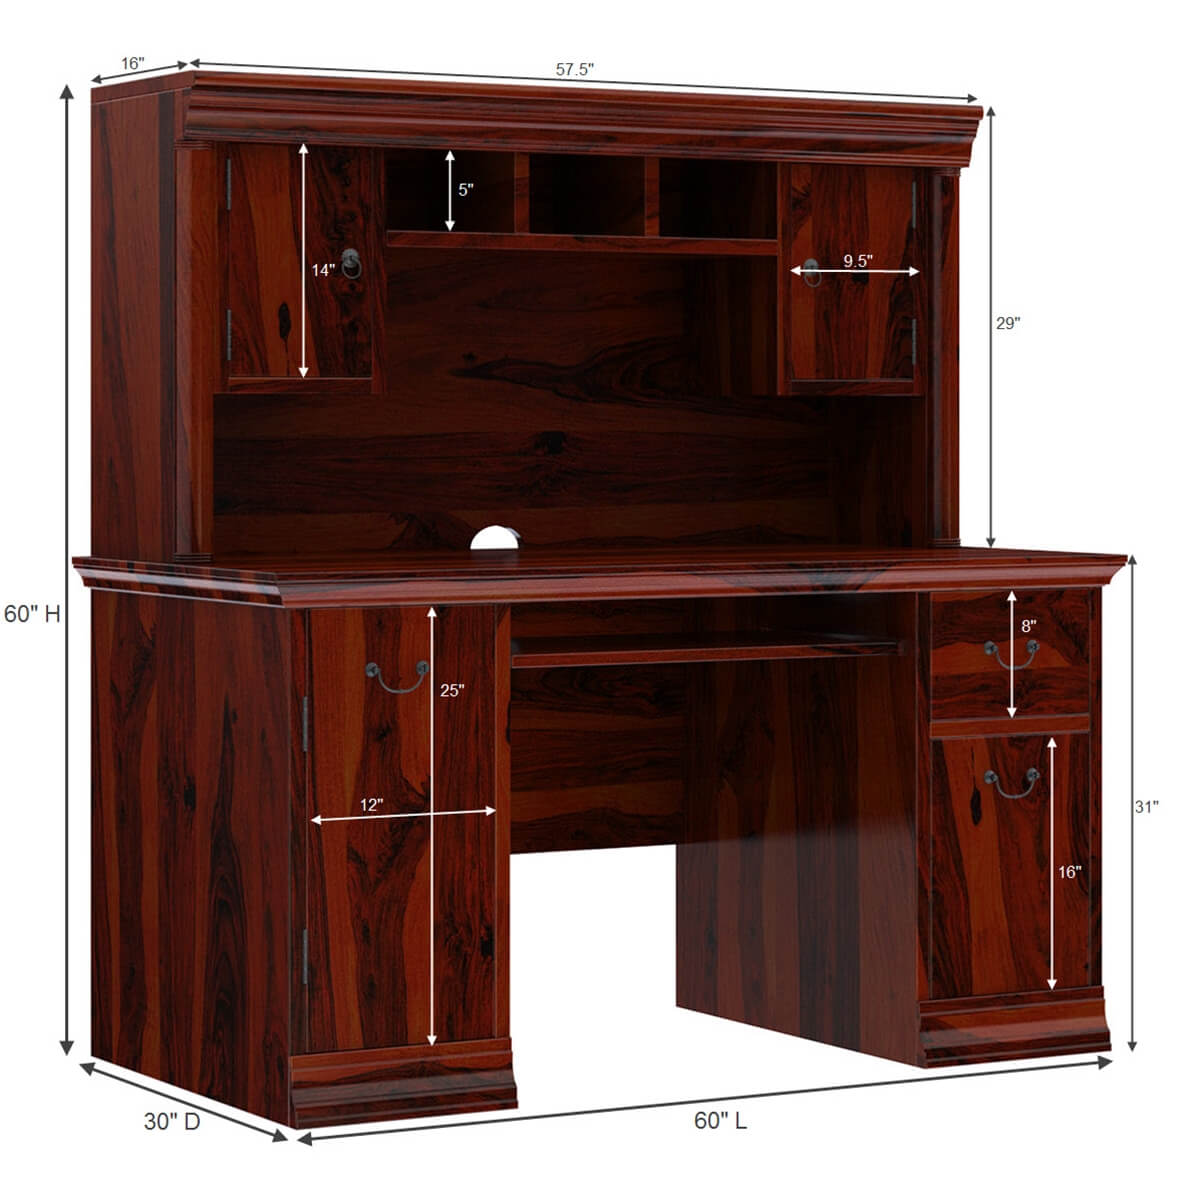 https://www.sierralivingconcepts.com/images/thumbs/0400052_brooten-rustic-solid-wood-home-office-computer-desk-with-hutch.jpeg